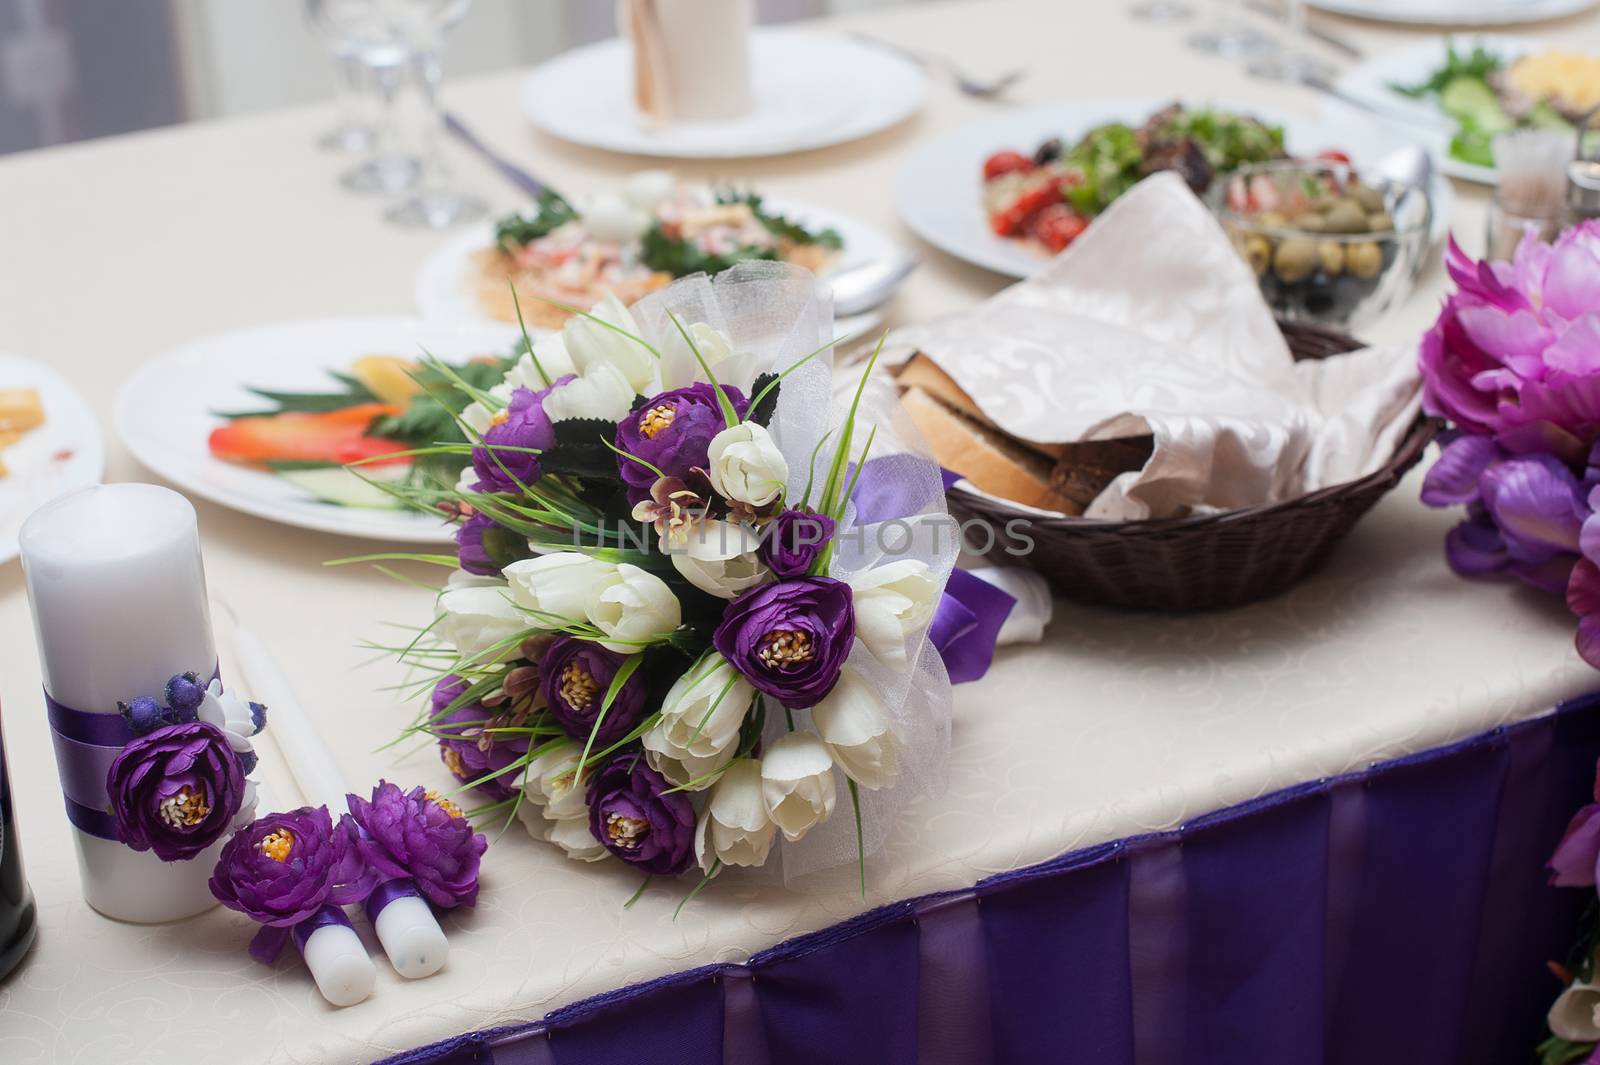 Beautiful decor of flowers at the wedding table.